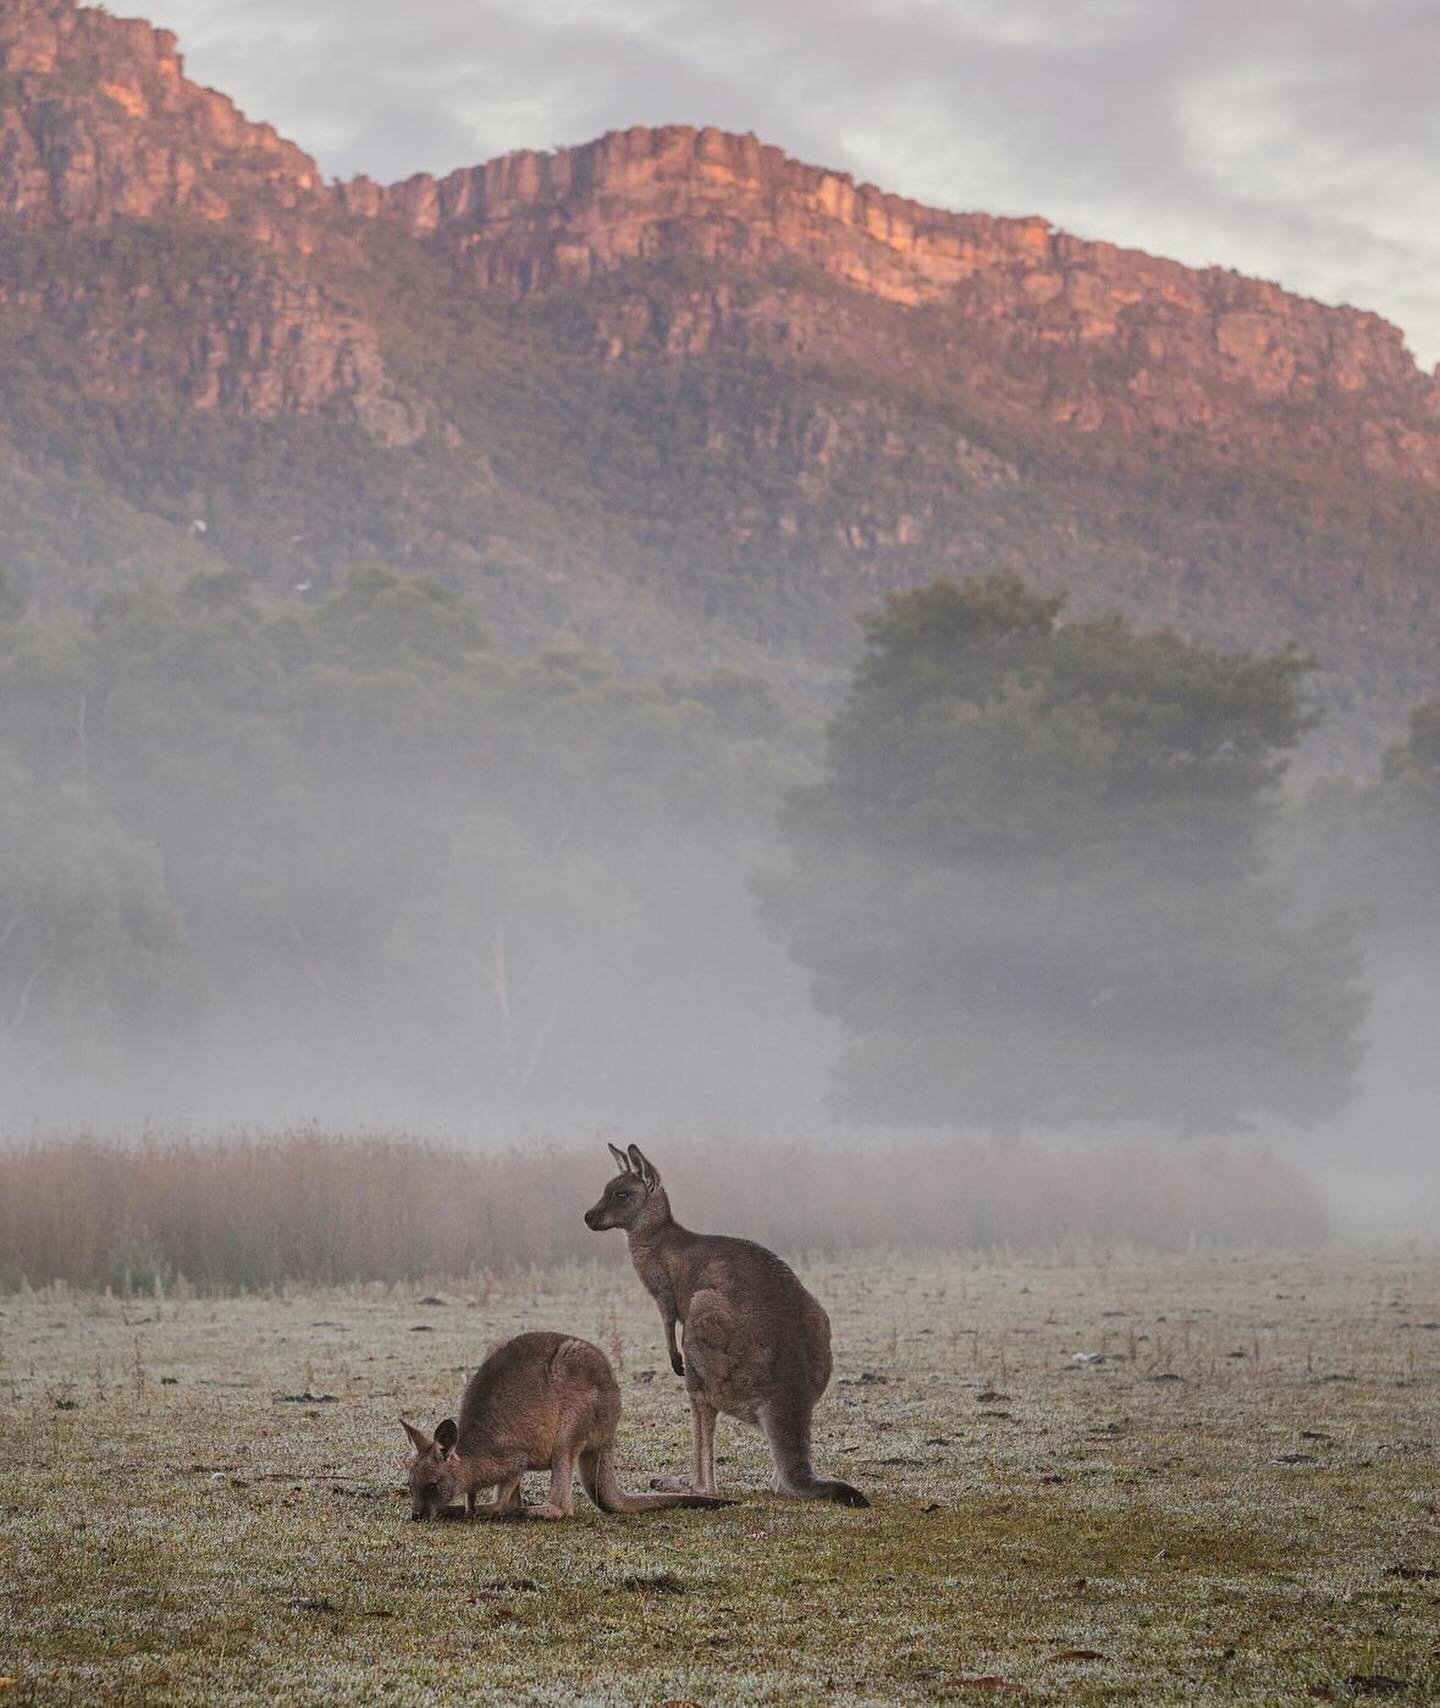 When you roll out of your camper for an early morning toilet run and come face to face with this view and need to race back to get your camera!! Love camping in the Grampians! 

#kangaroos #hallsgap #grampians #thegrampians #grampiansnationalpark #vi